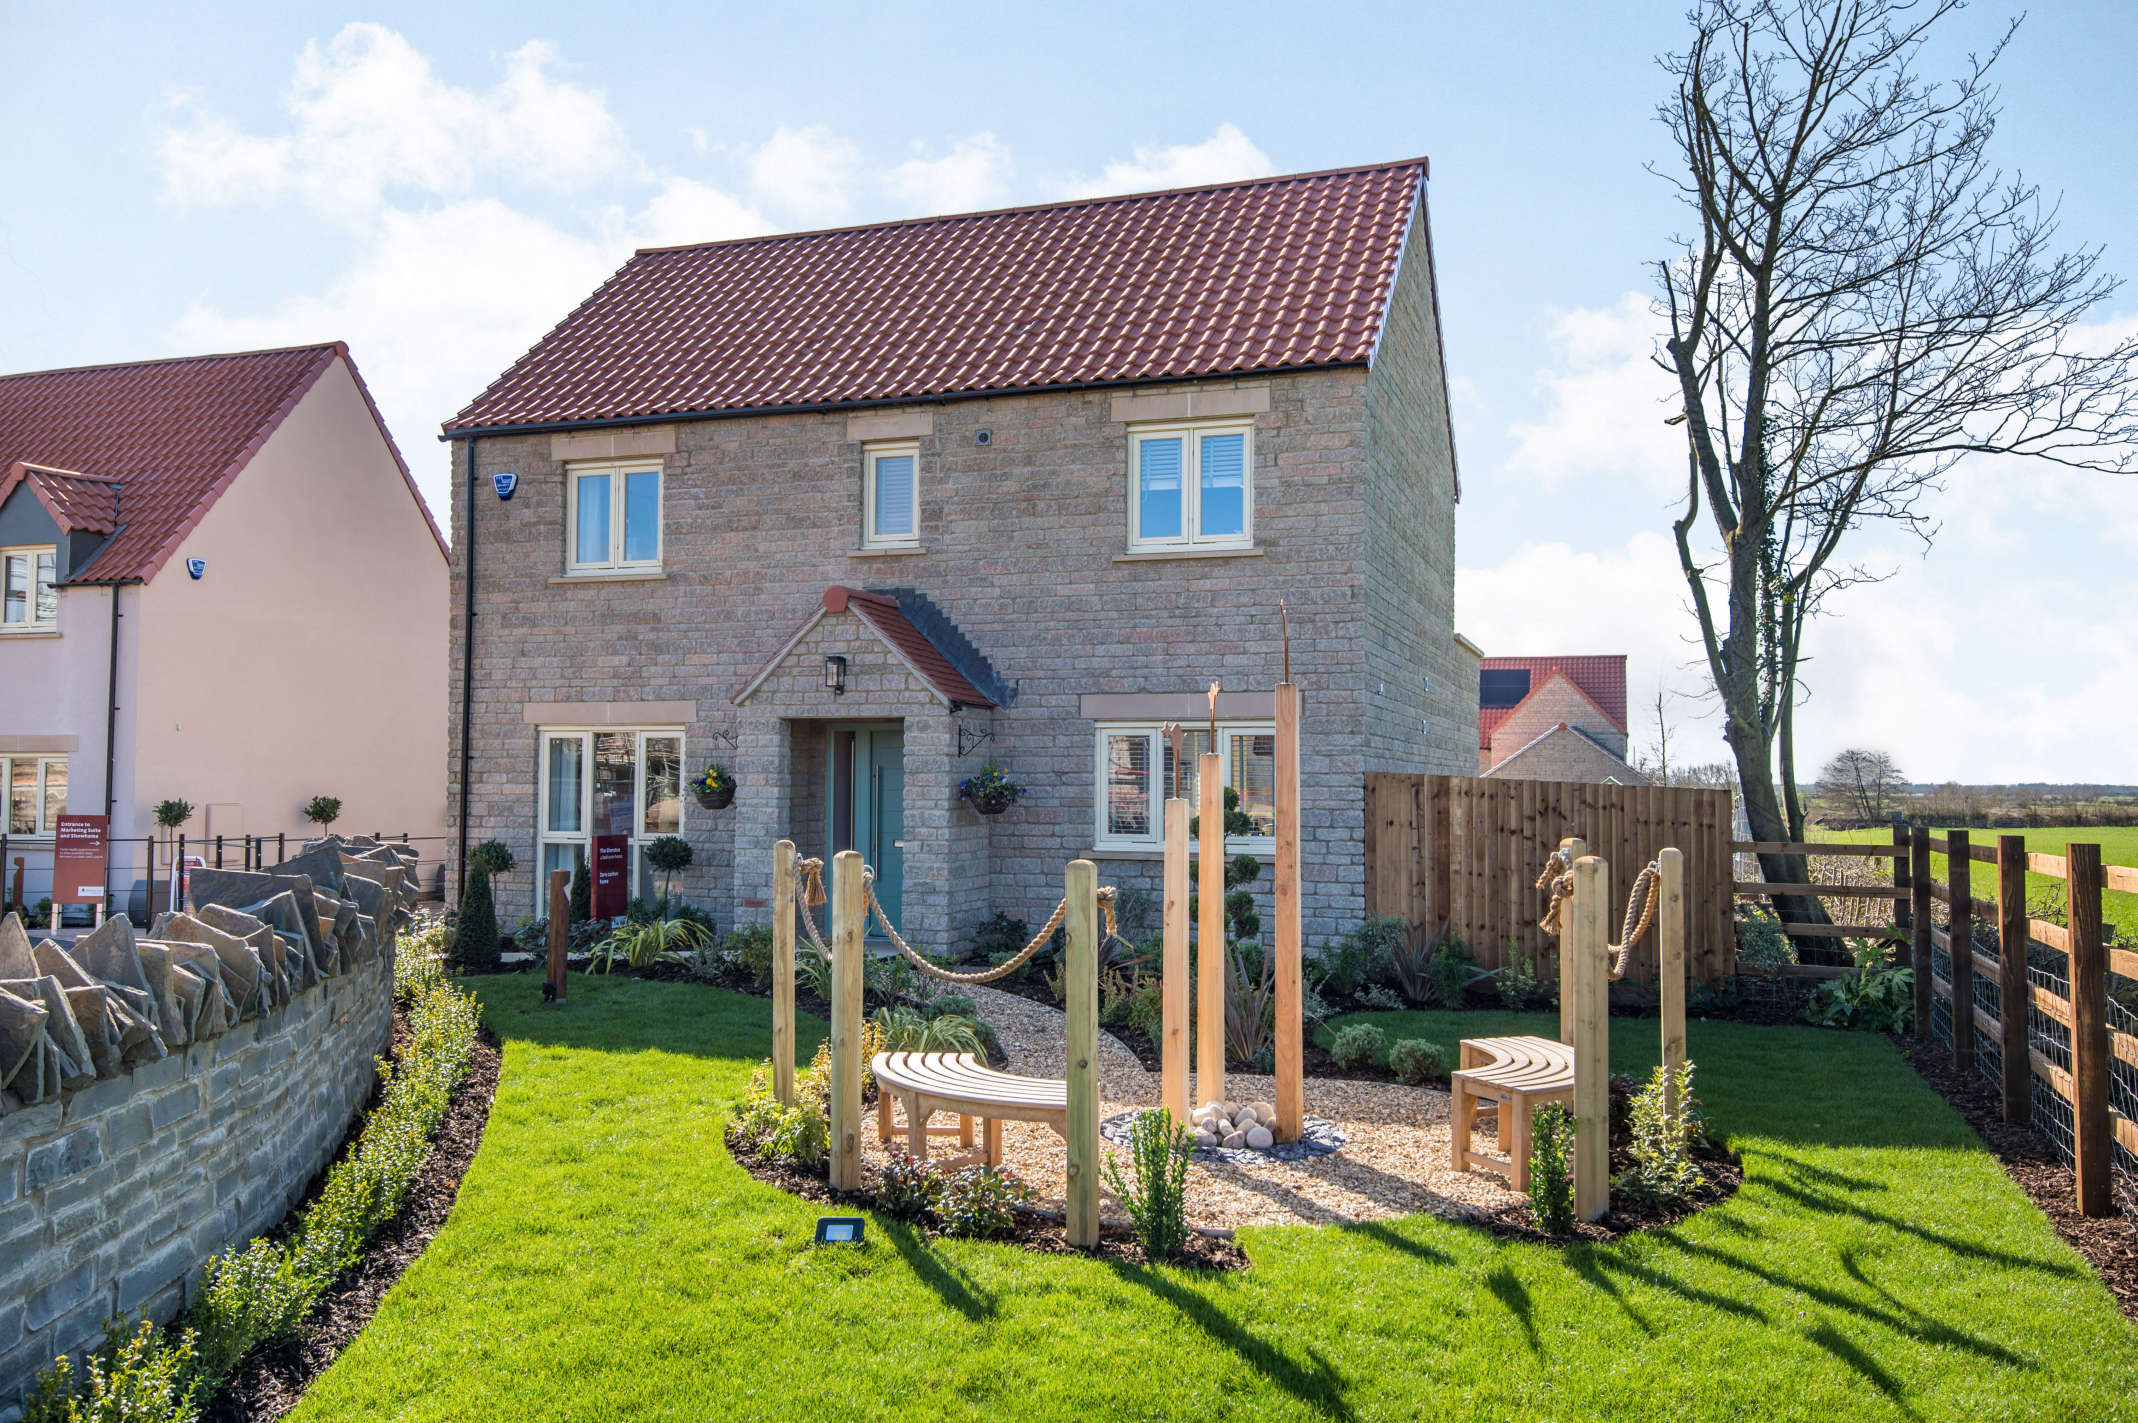 Sherston 4 bed detached zero carbon home